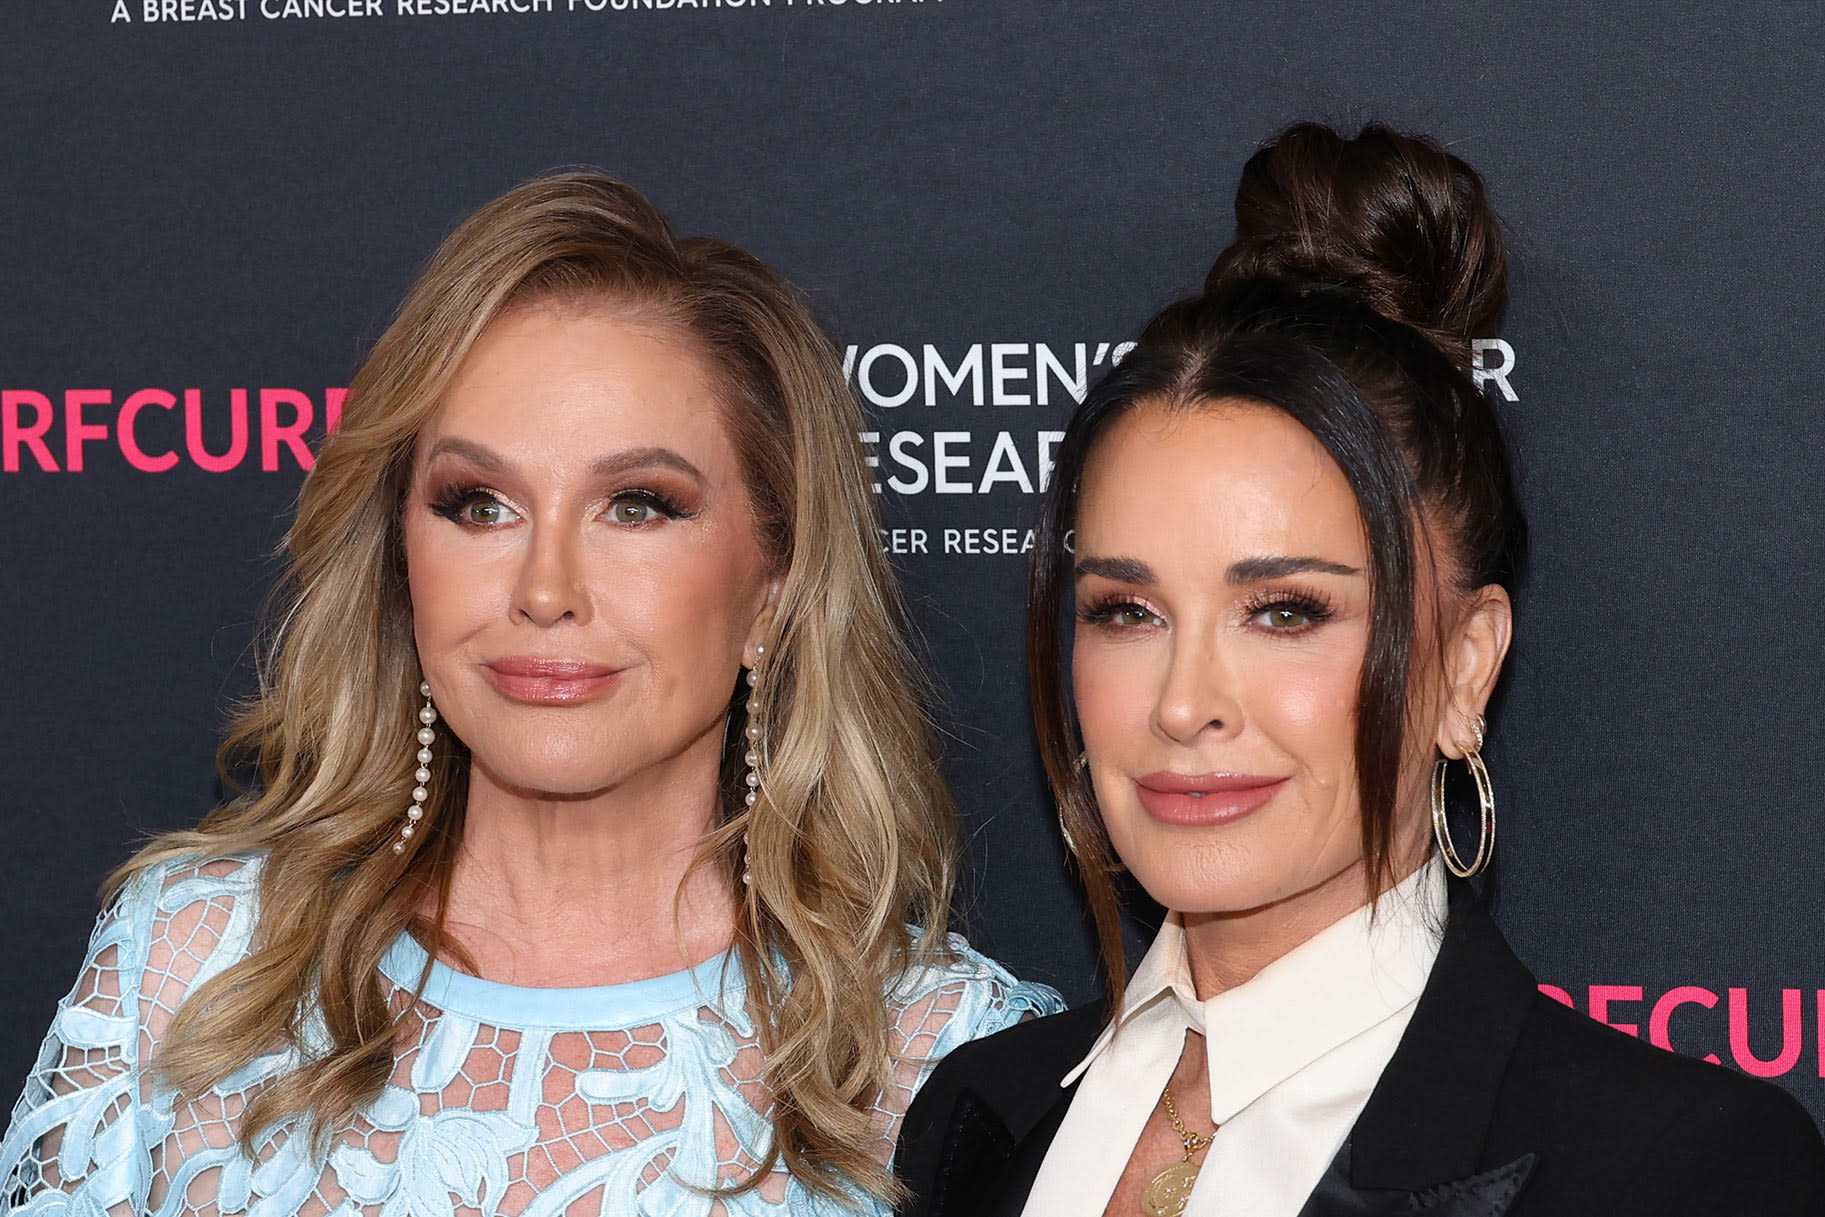 Kyle Richards Shows Kathy Hilton's Unexpected Home Transformation: "This Feels Strange" | Bravo TV Official Site